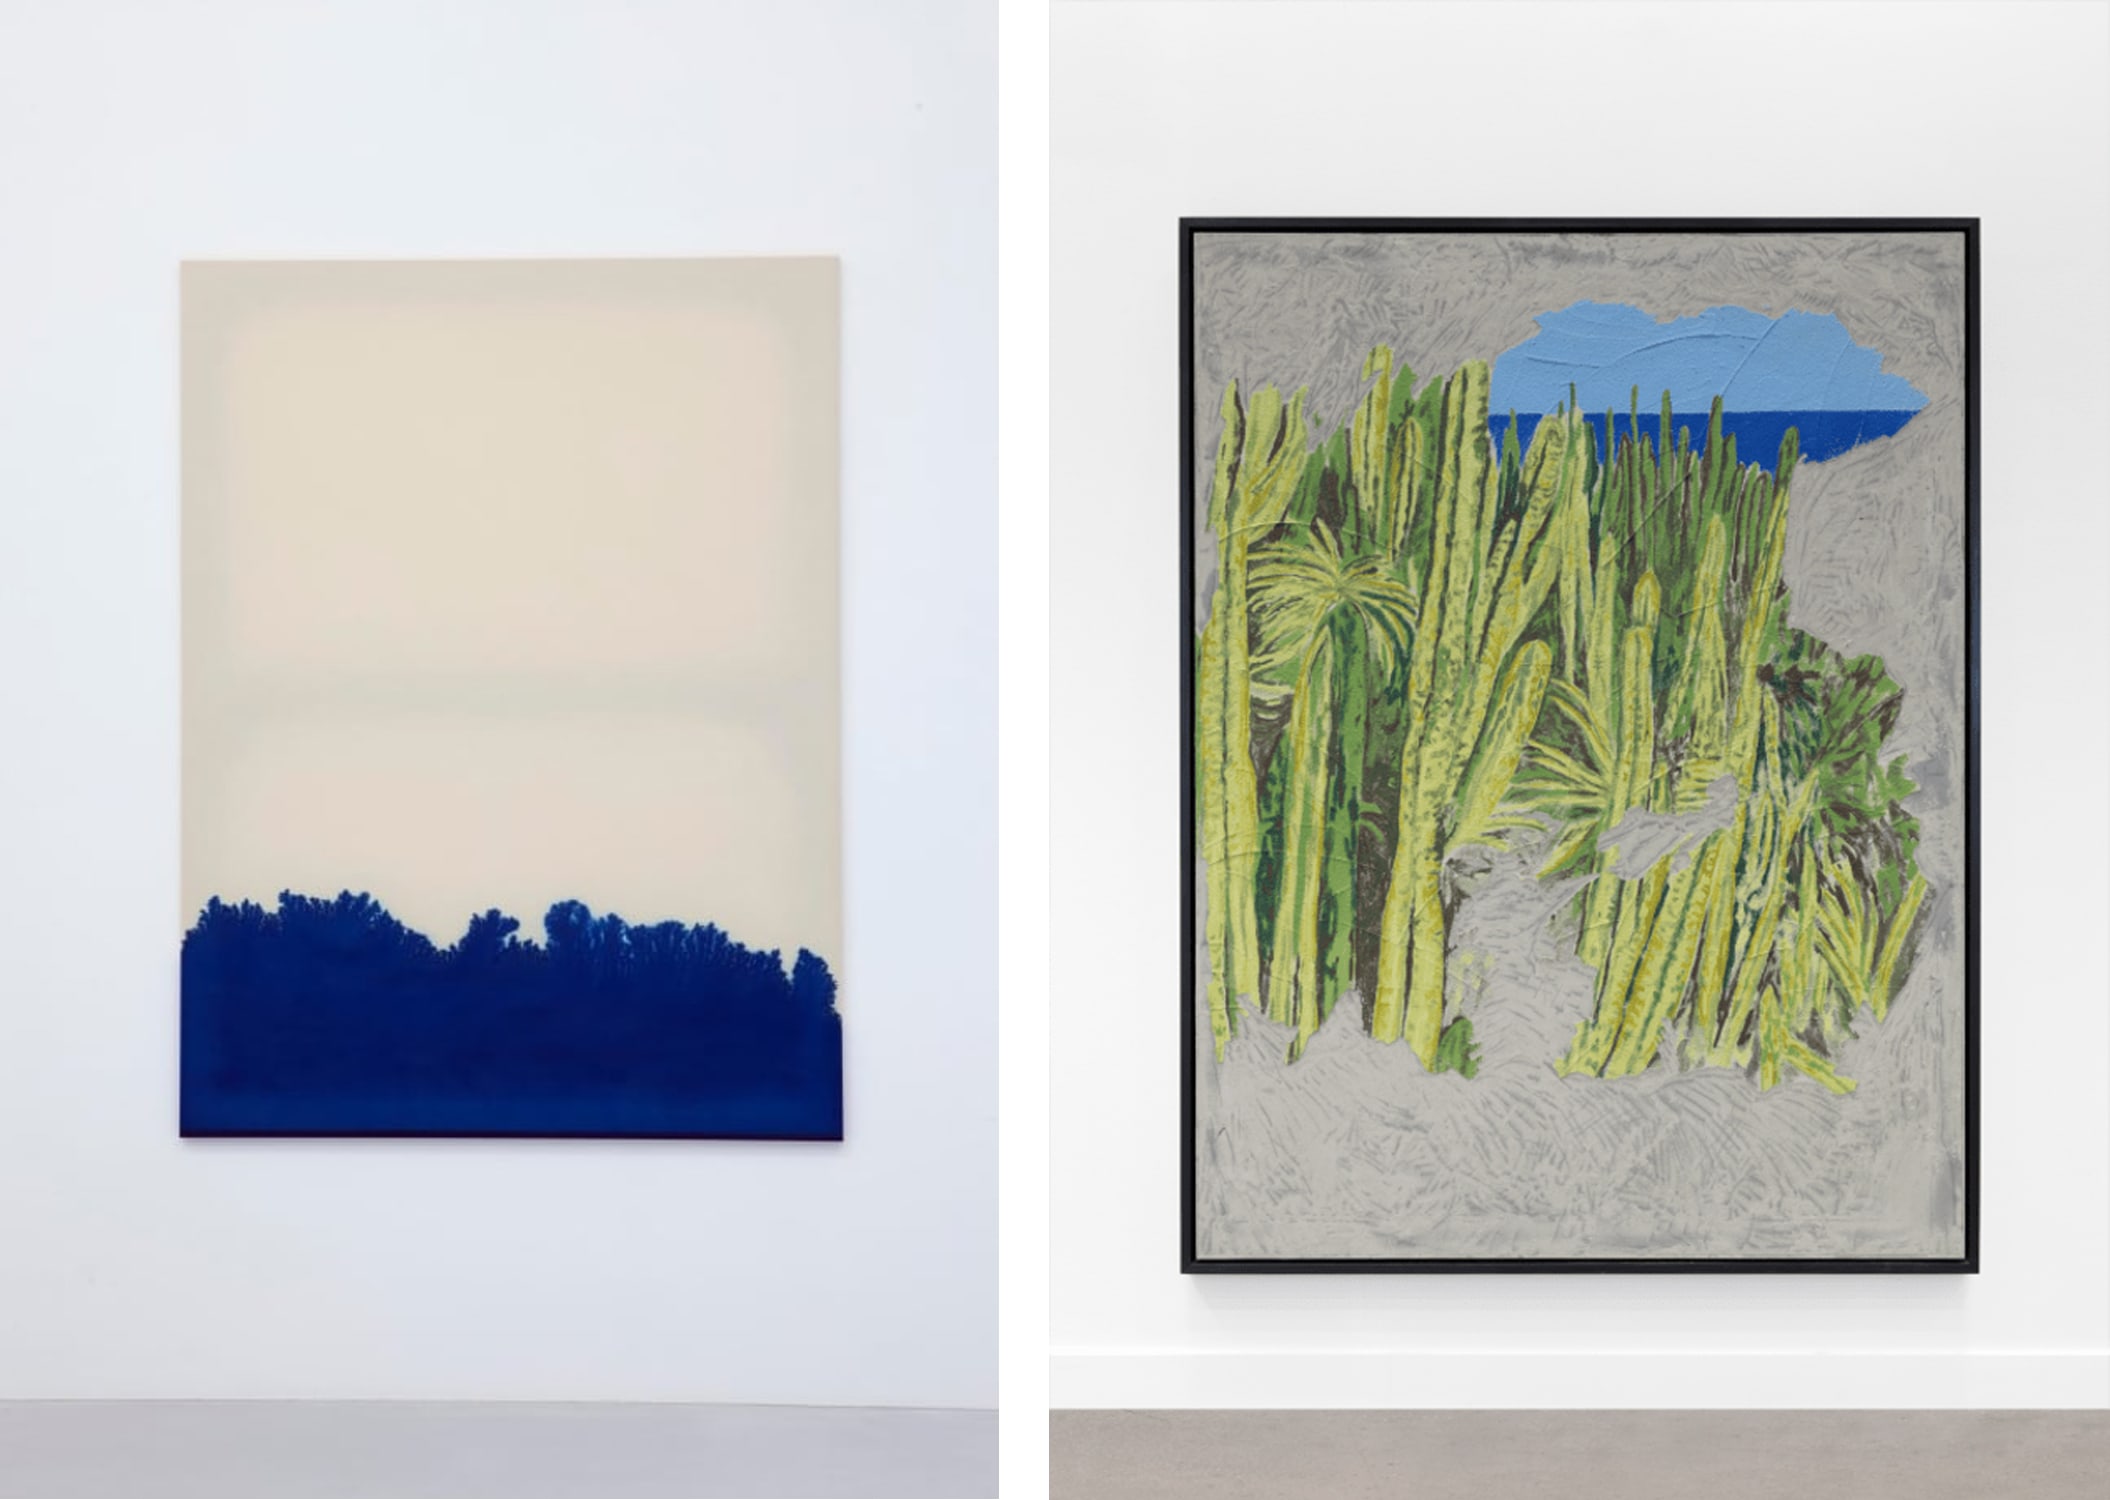 Left: Latifa Echakhch, Cannot remember what was the first image, and close eyes again to recover., 2014, presented at Art Basel Miami Beach 2017 by kamel mennour, Paris and London. Right: Latifa Echakhch, Sans Titre (Le Jardin Exotique), 2019, presented at Art Basel in Basel by Kaufmann Repetto, Milan and New York City.